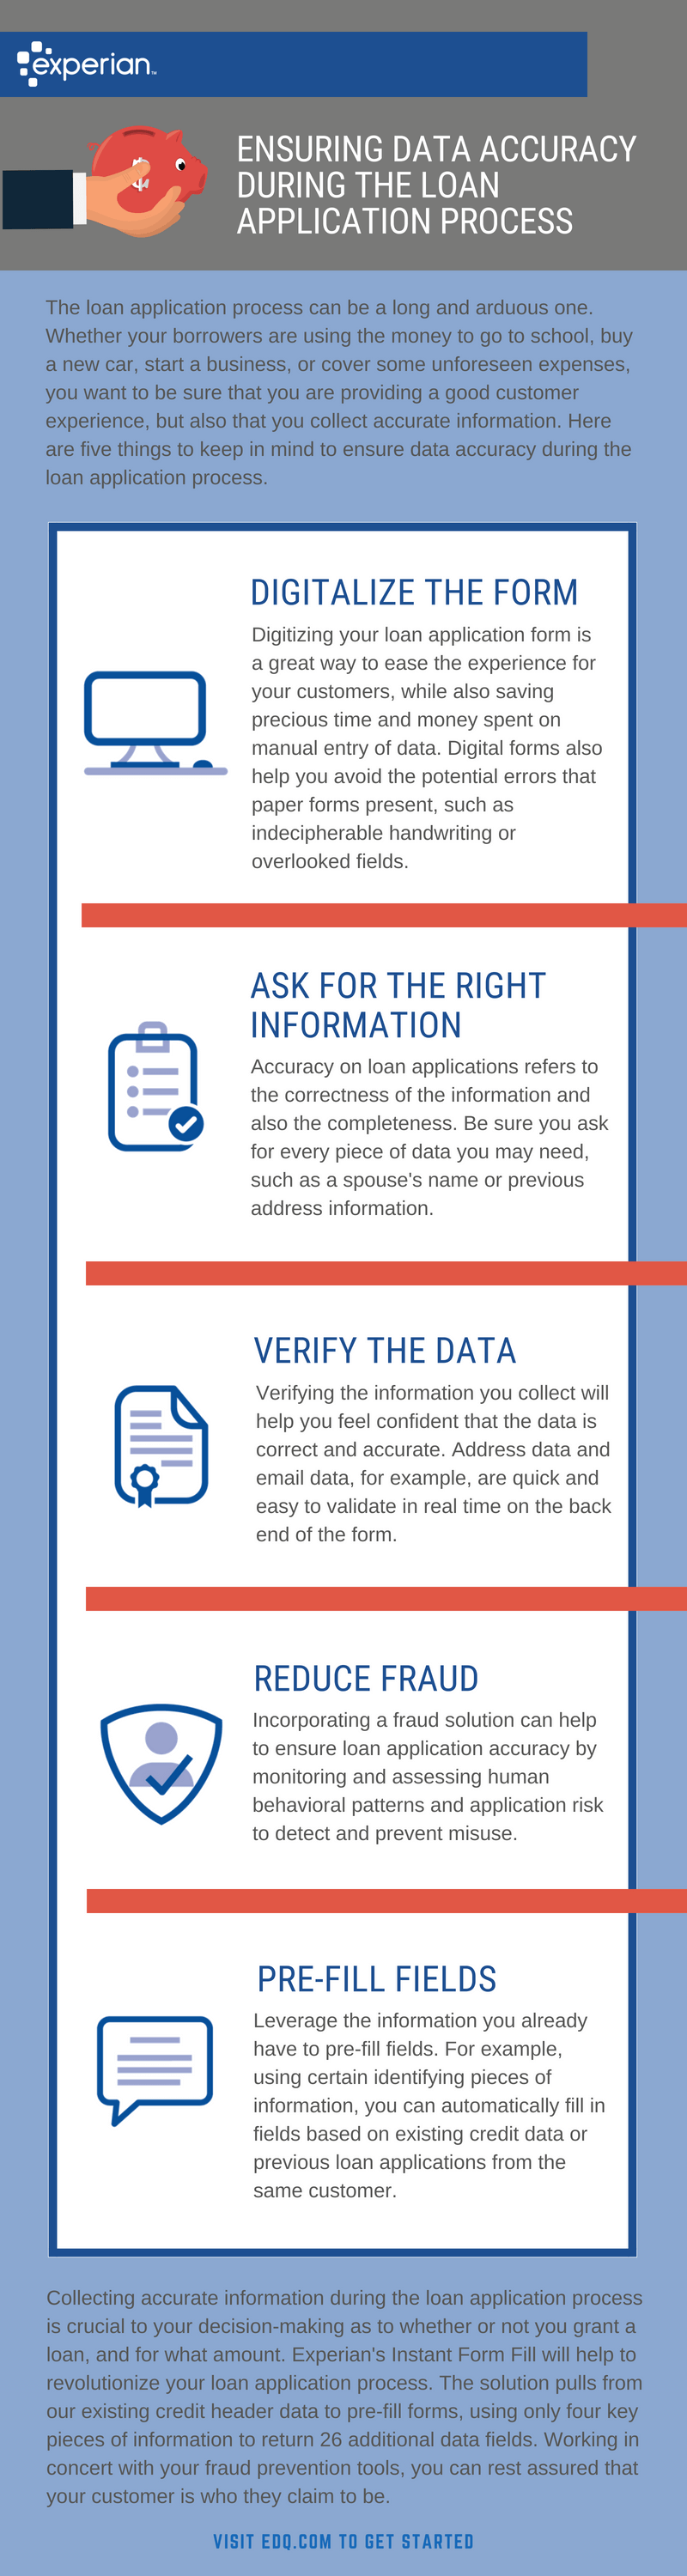 ensuring data accuracy infographic